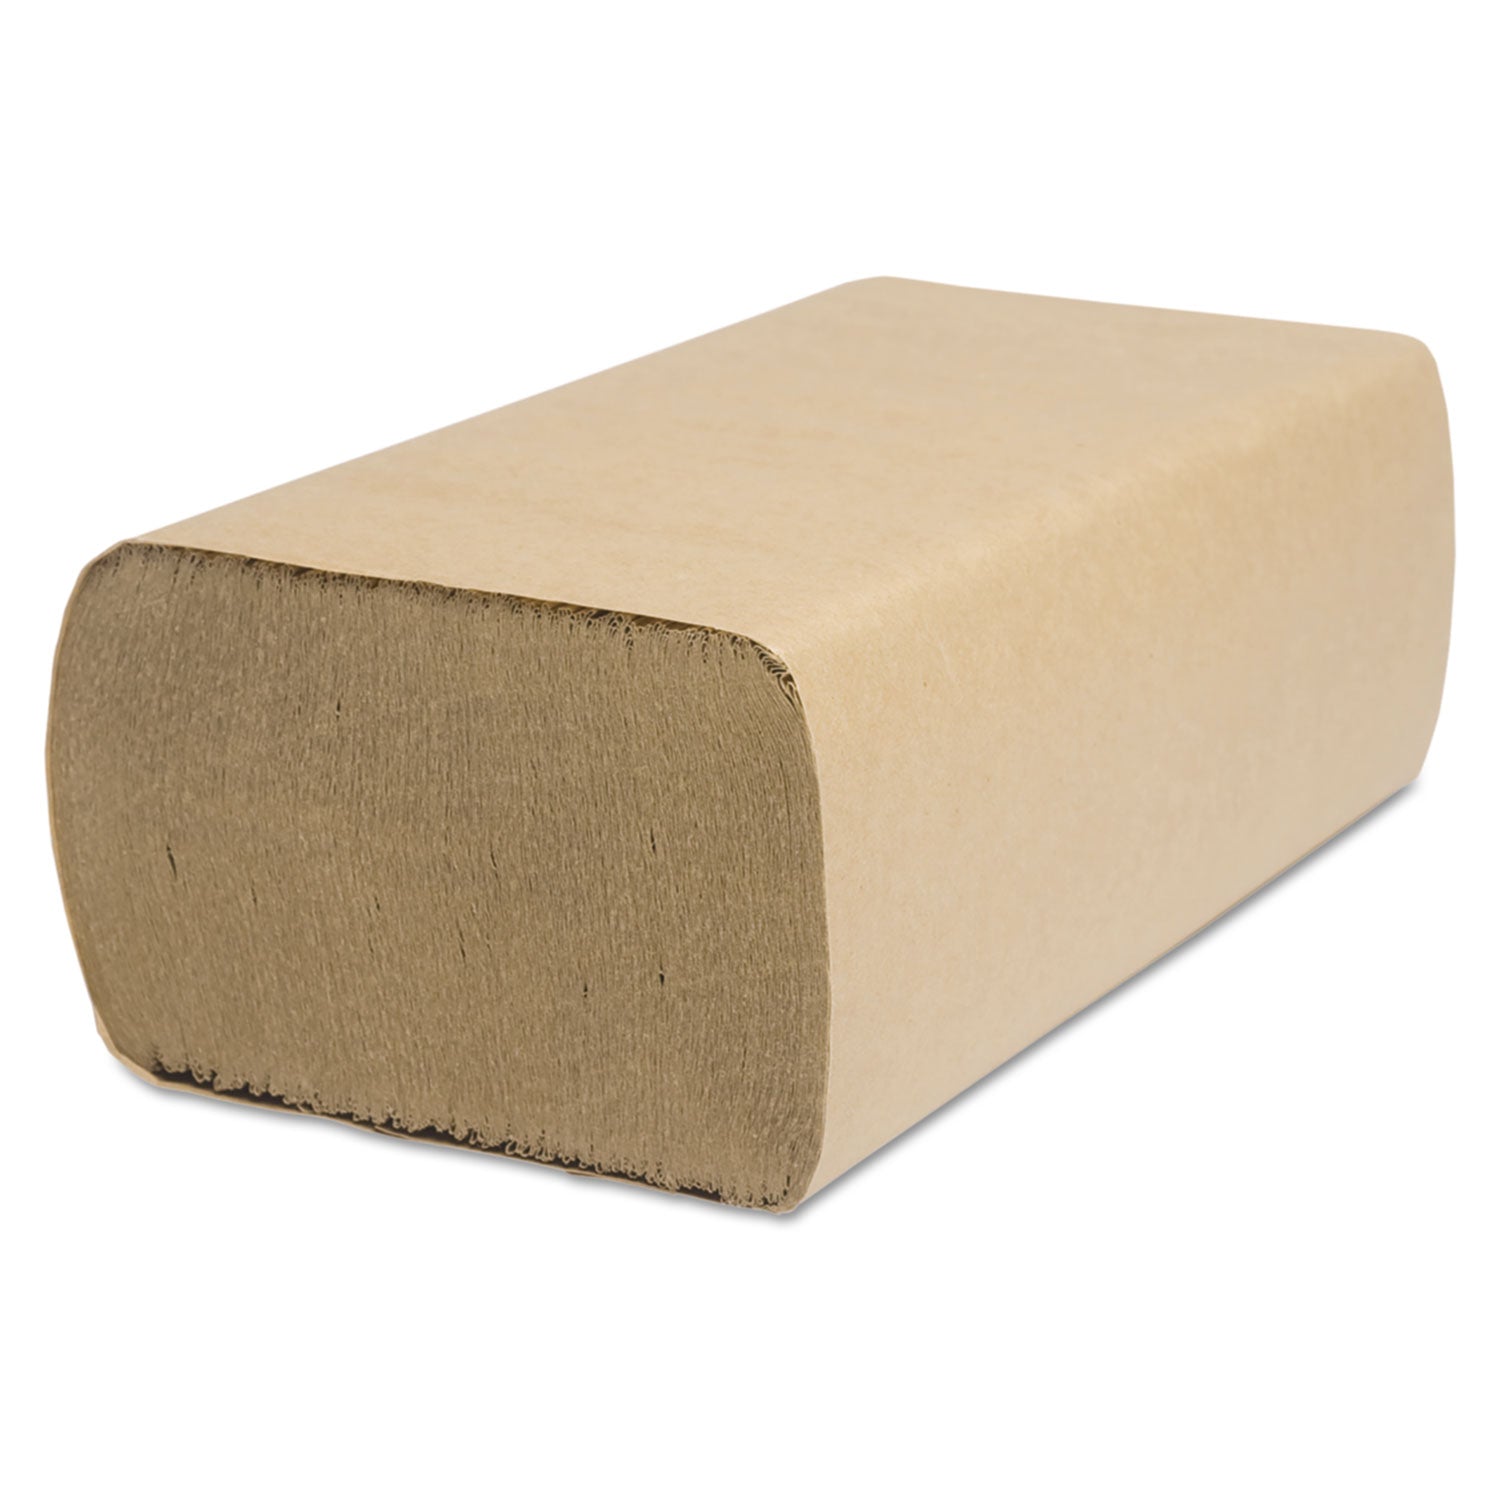 Cascades Select Folded Towel, Multifold, Natural, 9 X 9.45, 250/Pack, 4000/Carton - CSDH175